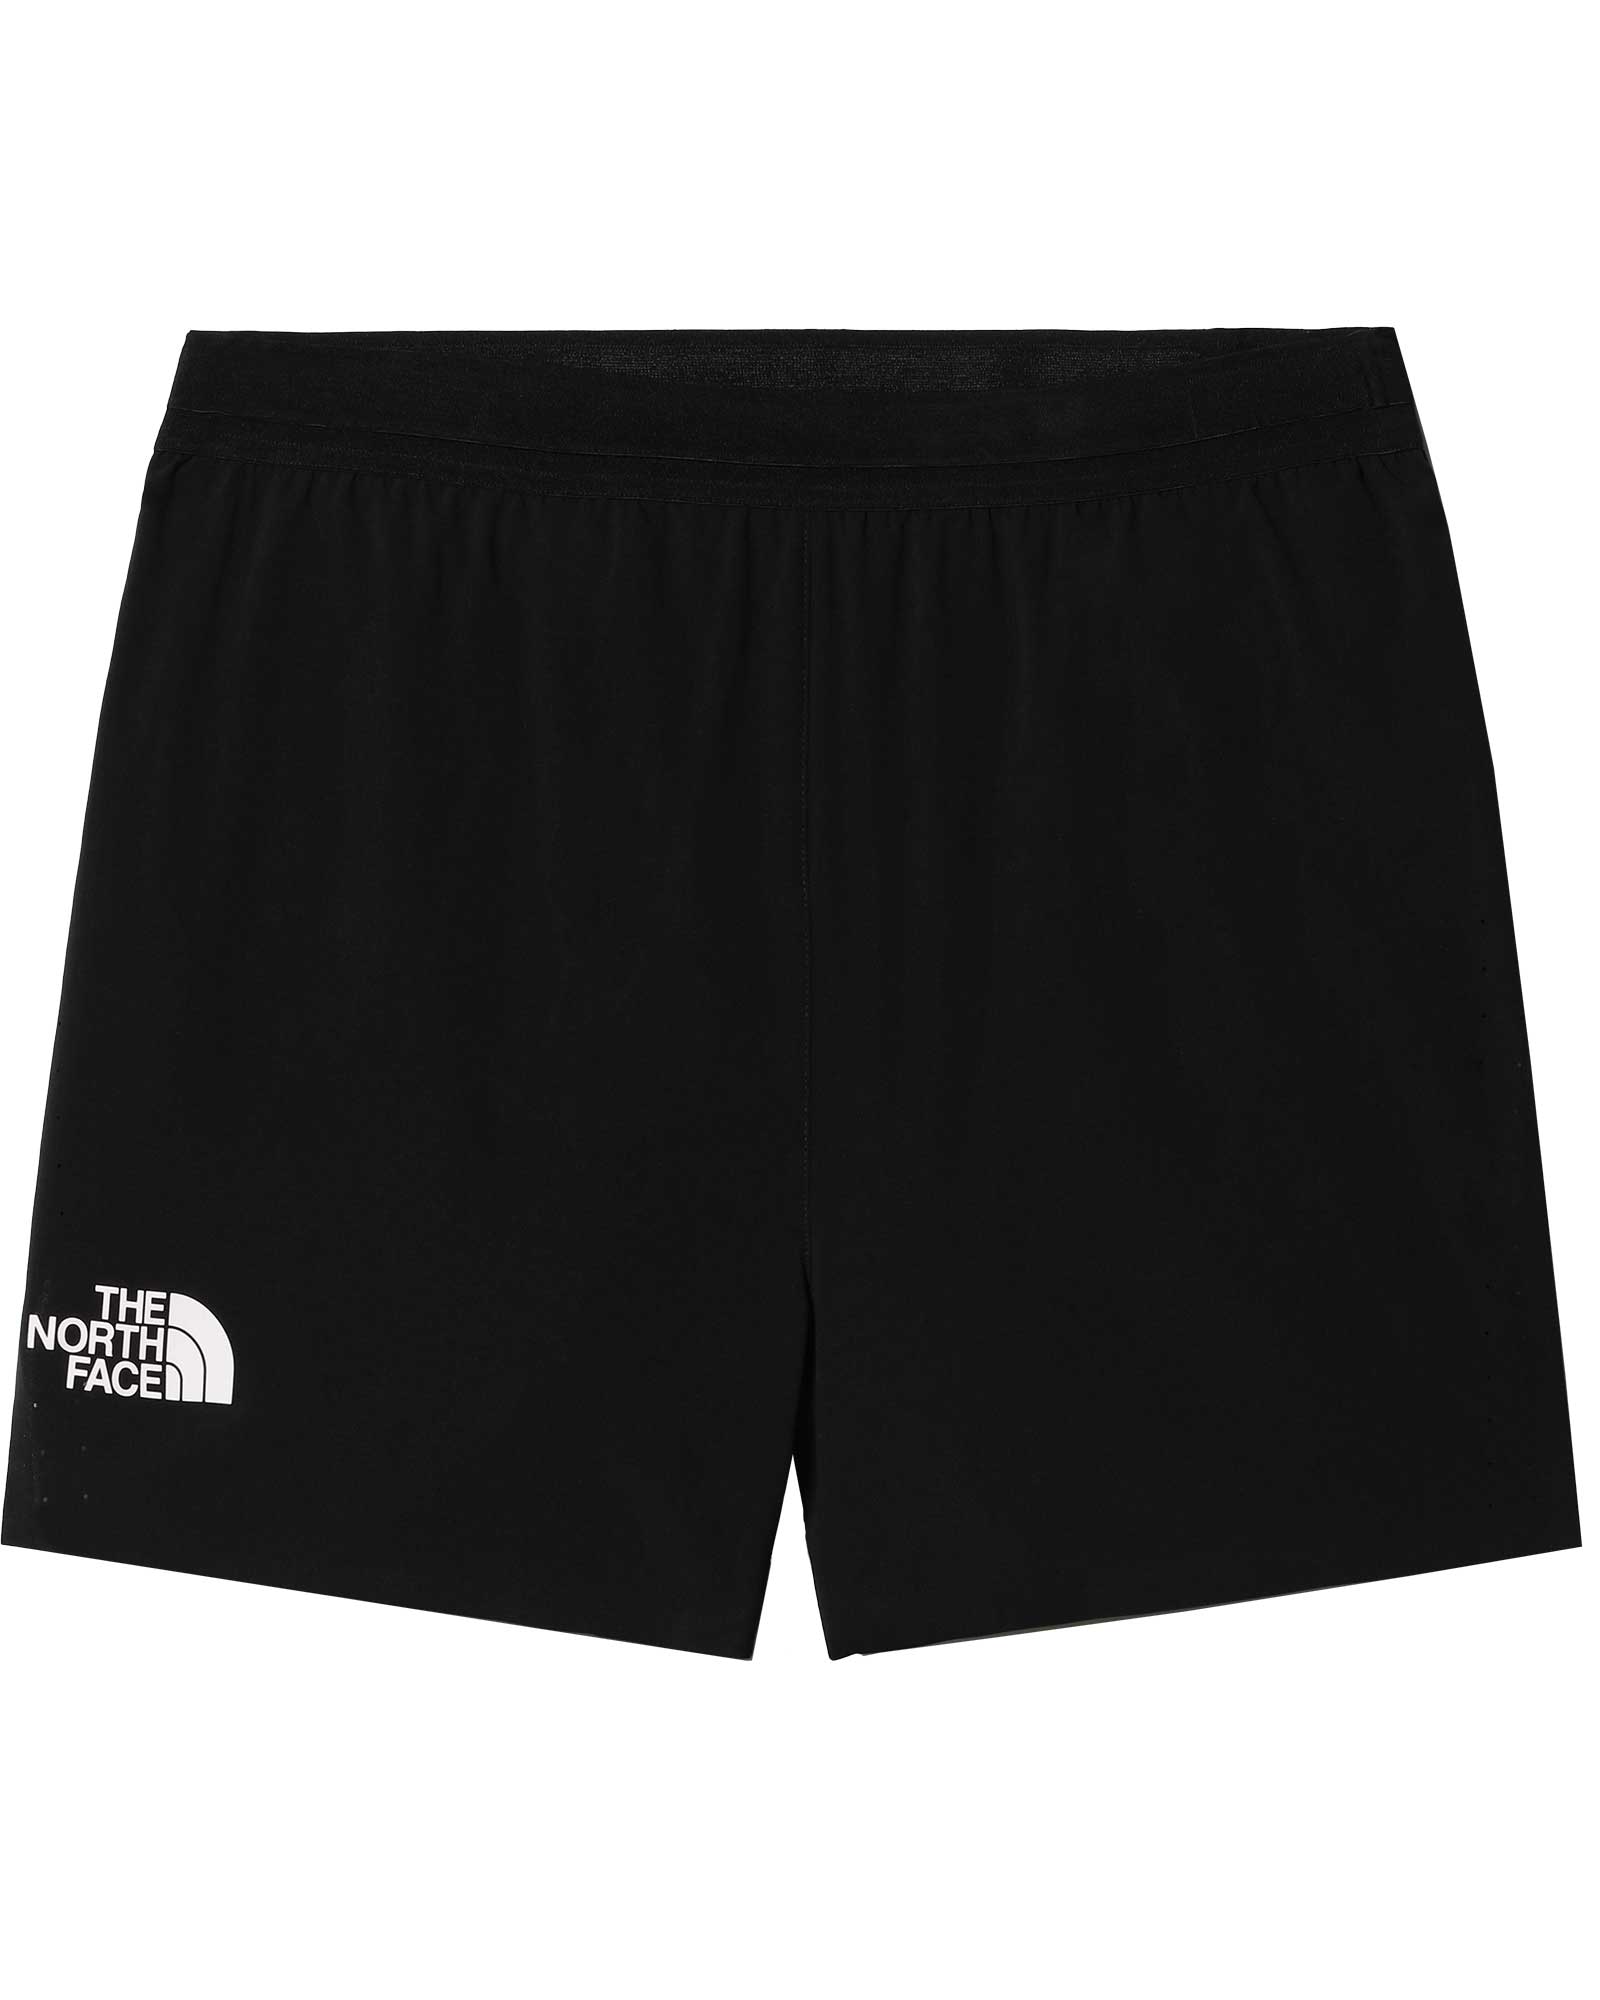 The North Face Flight Stridelight 2 In 1 Mens Shorts